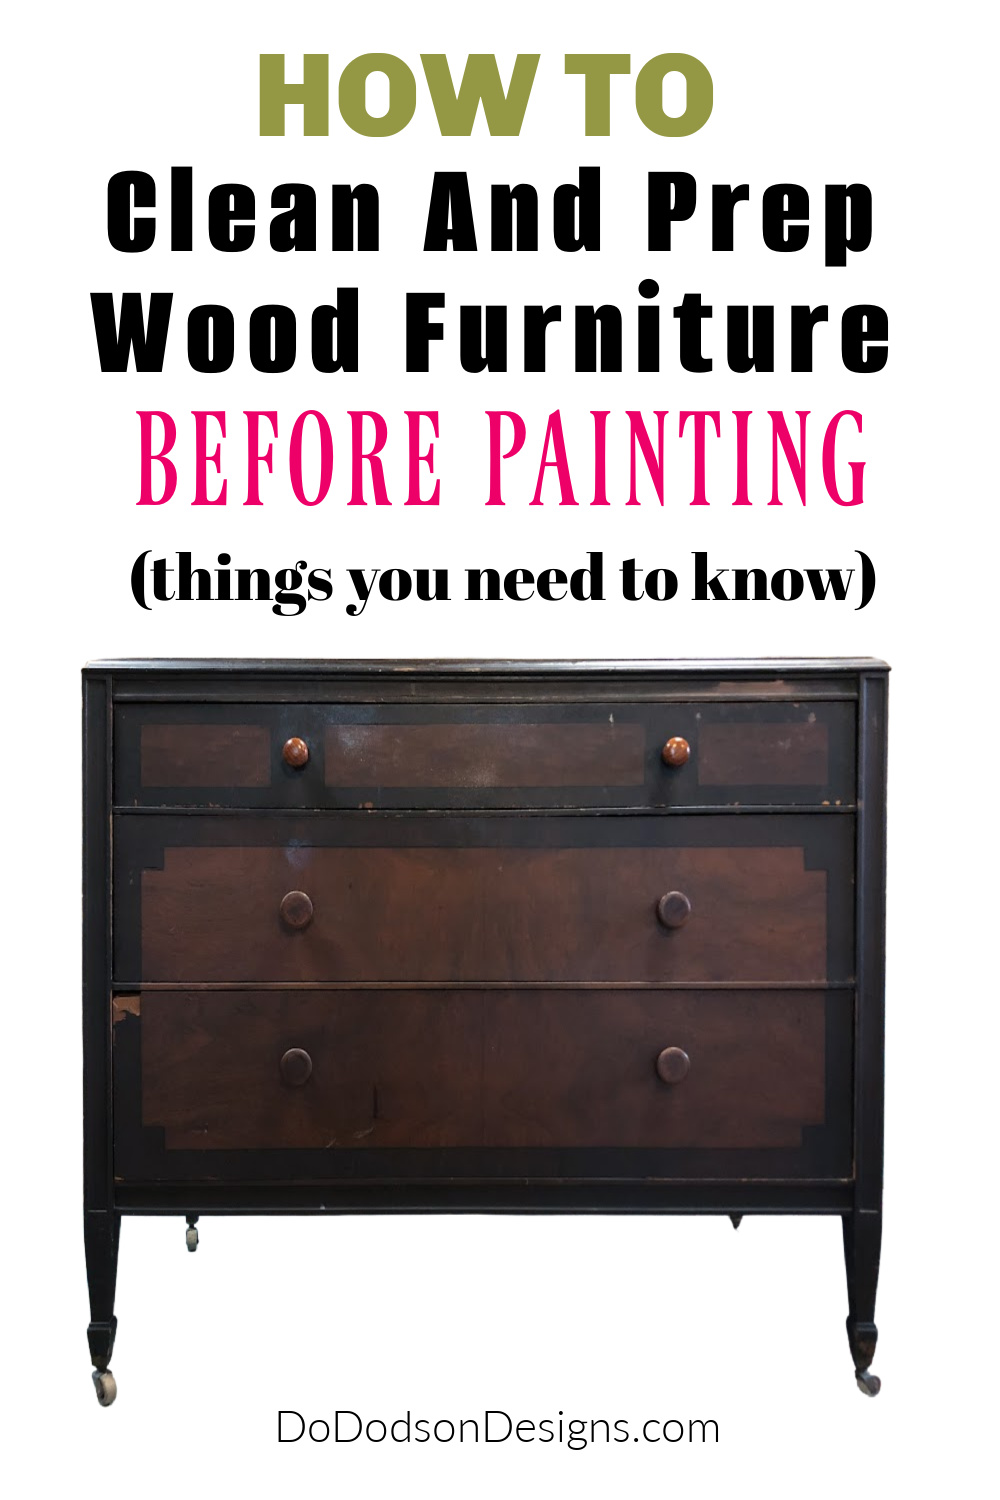 Repainting Furniture Using a Paint Sprayer - The Home Depot